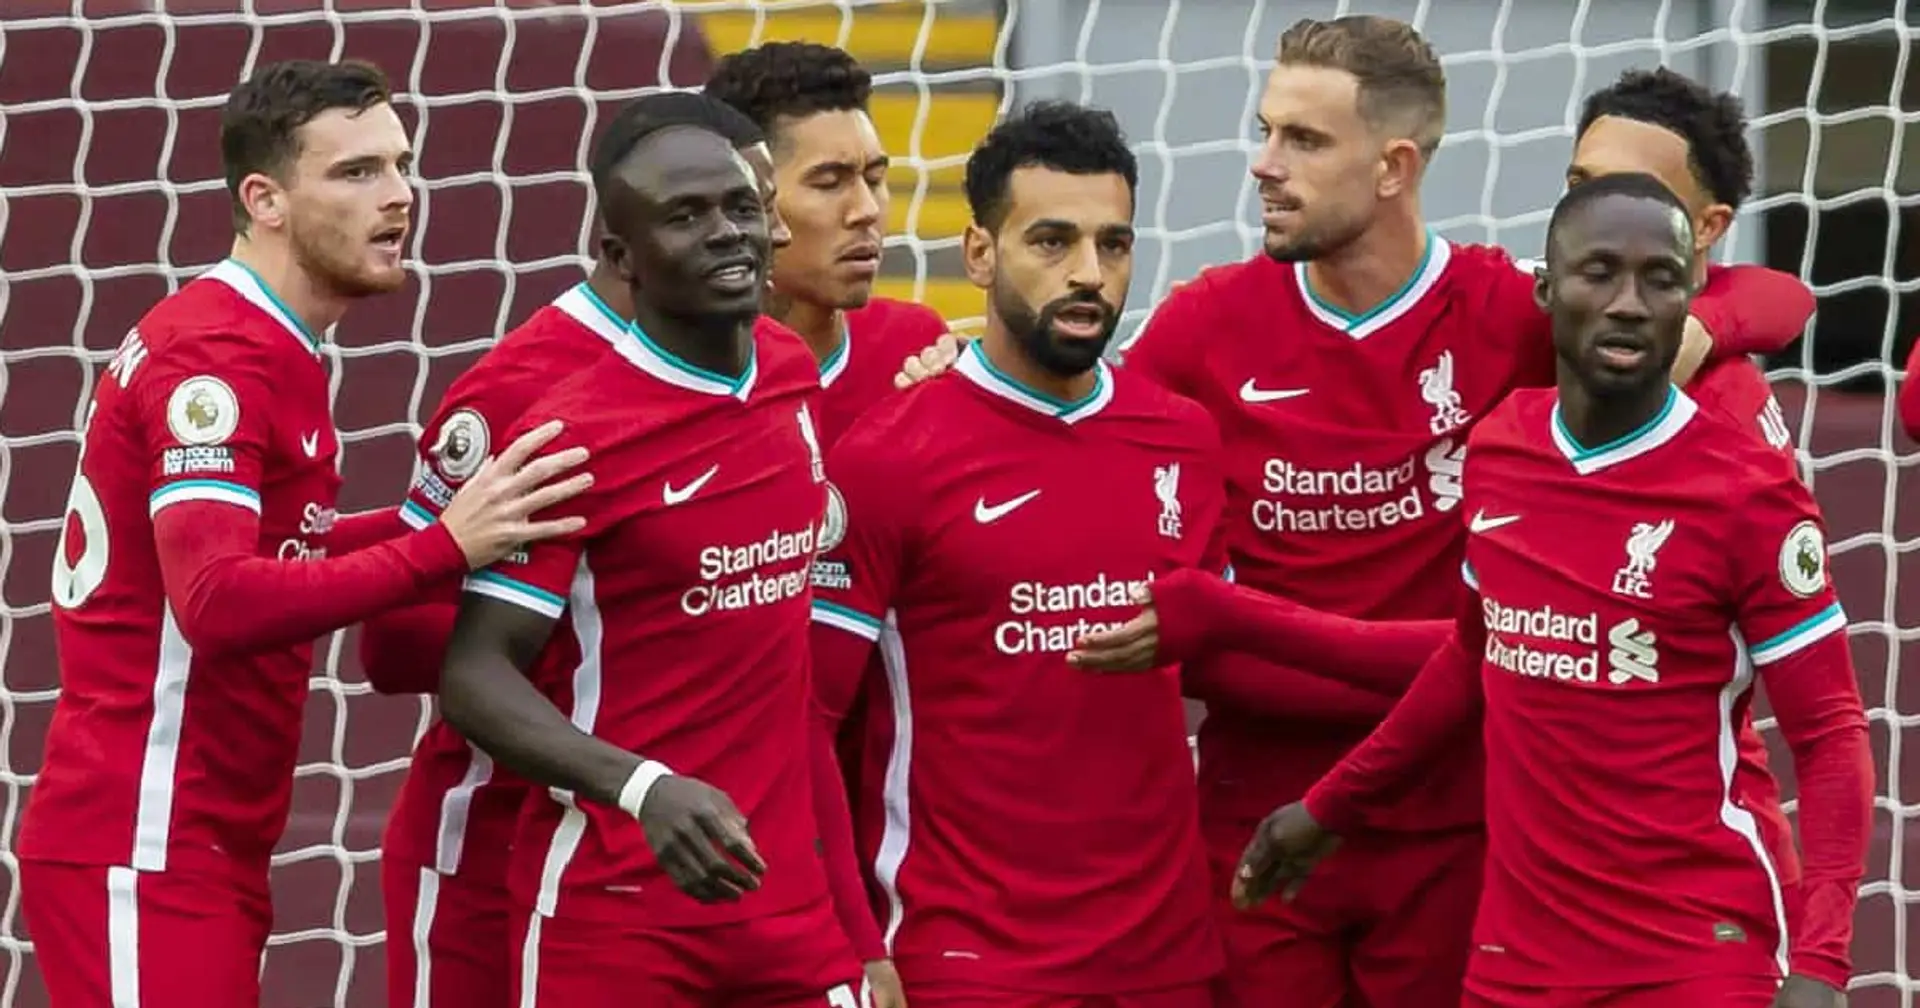 Liverpool vs Tottenham: Team news, predicted line-up, score predictions and more - preview